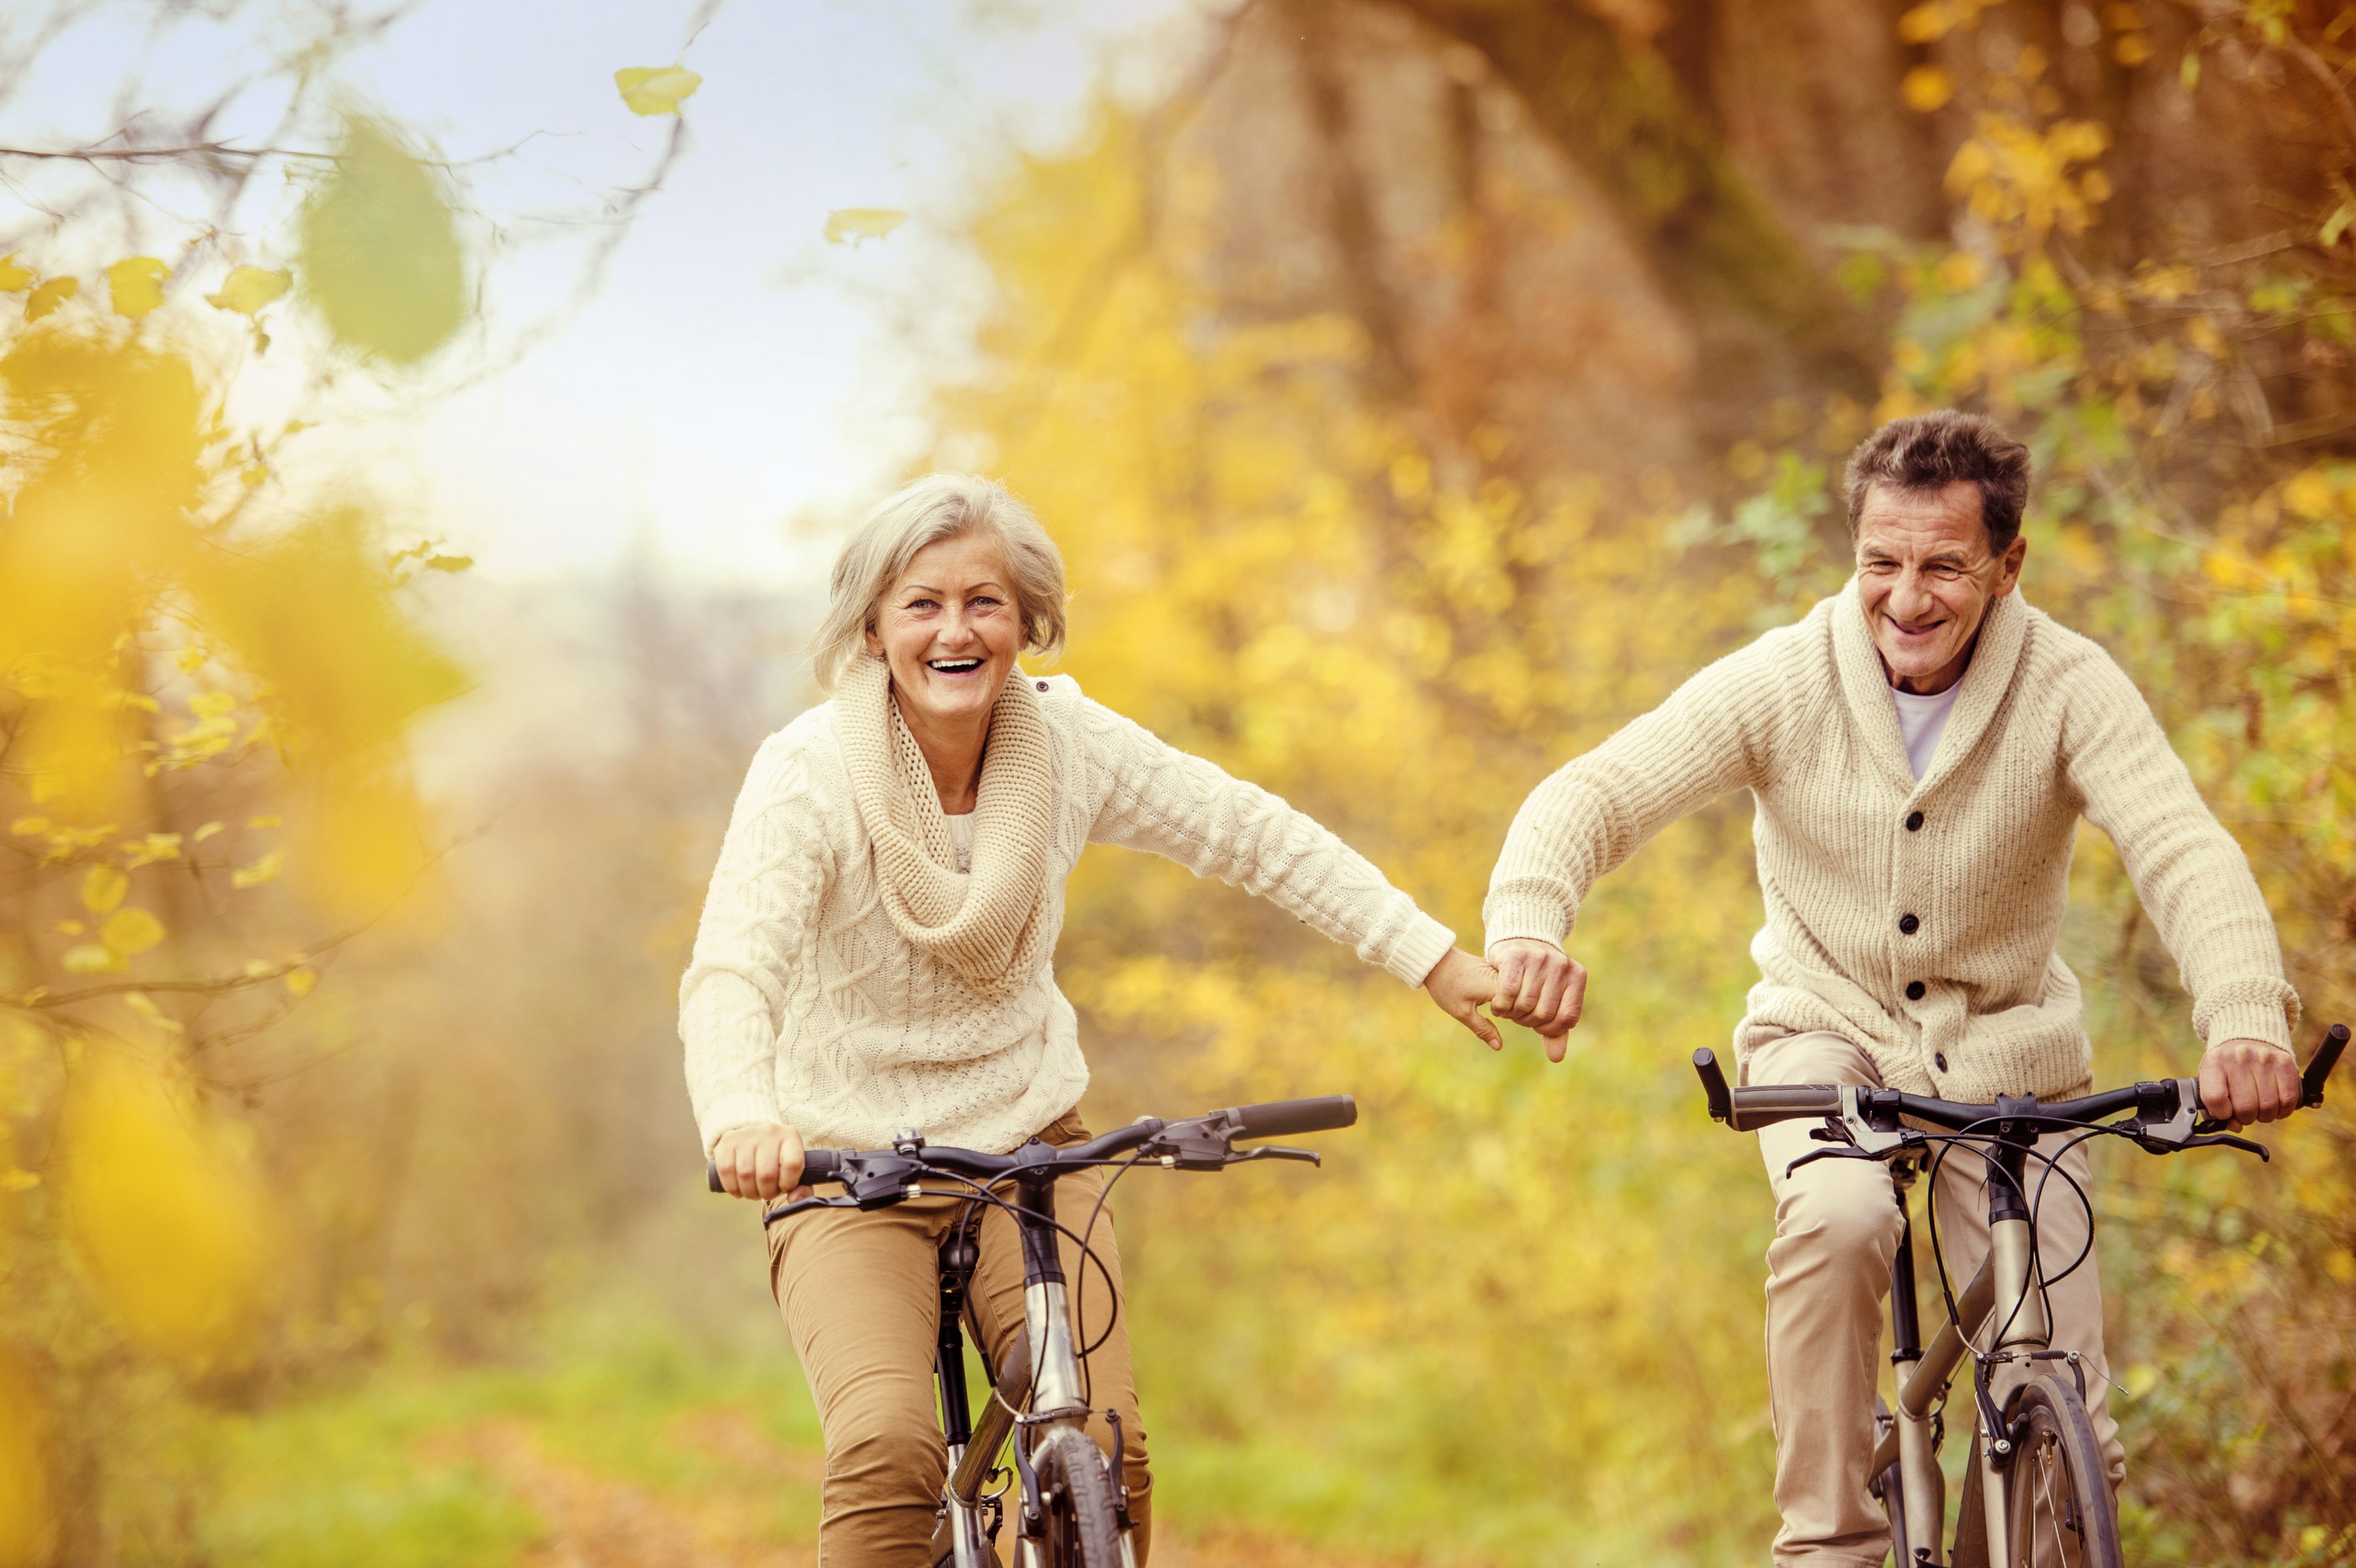 Happy older couple riding bicycles and holding hands down leafy lane.